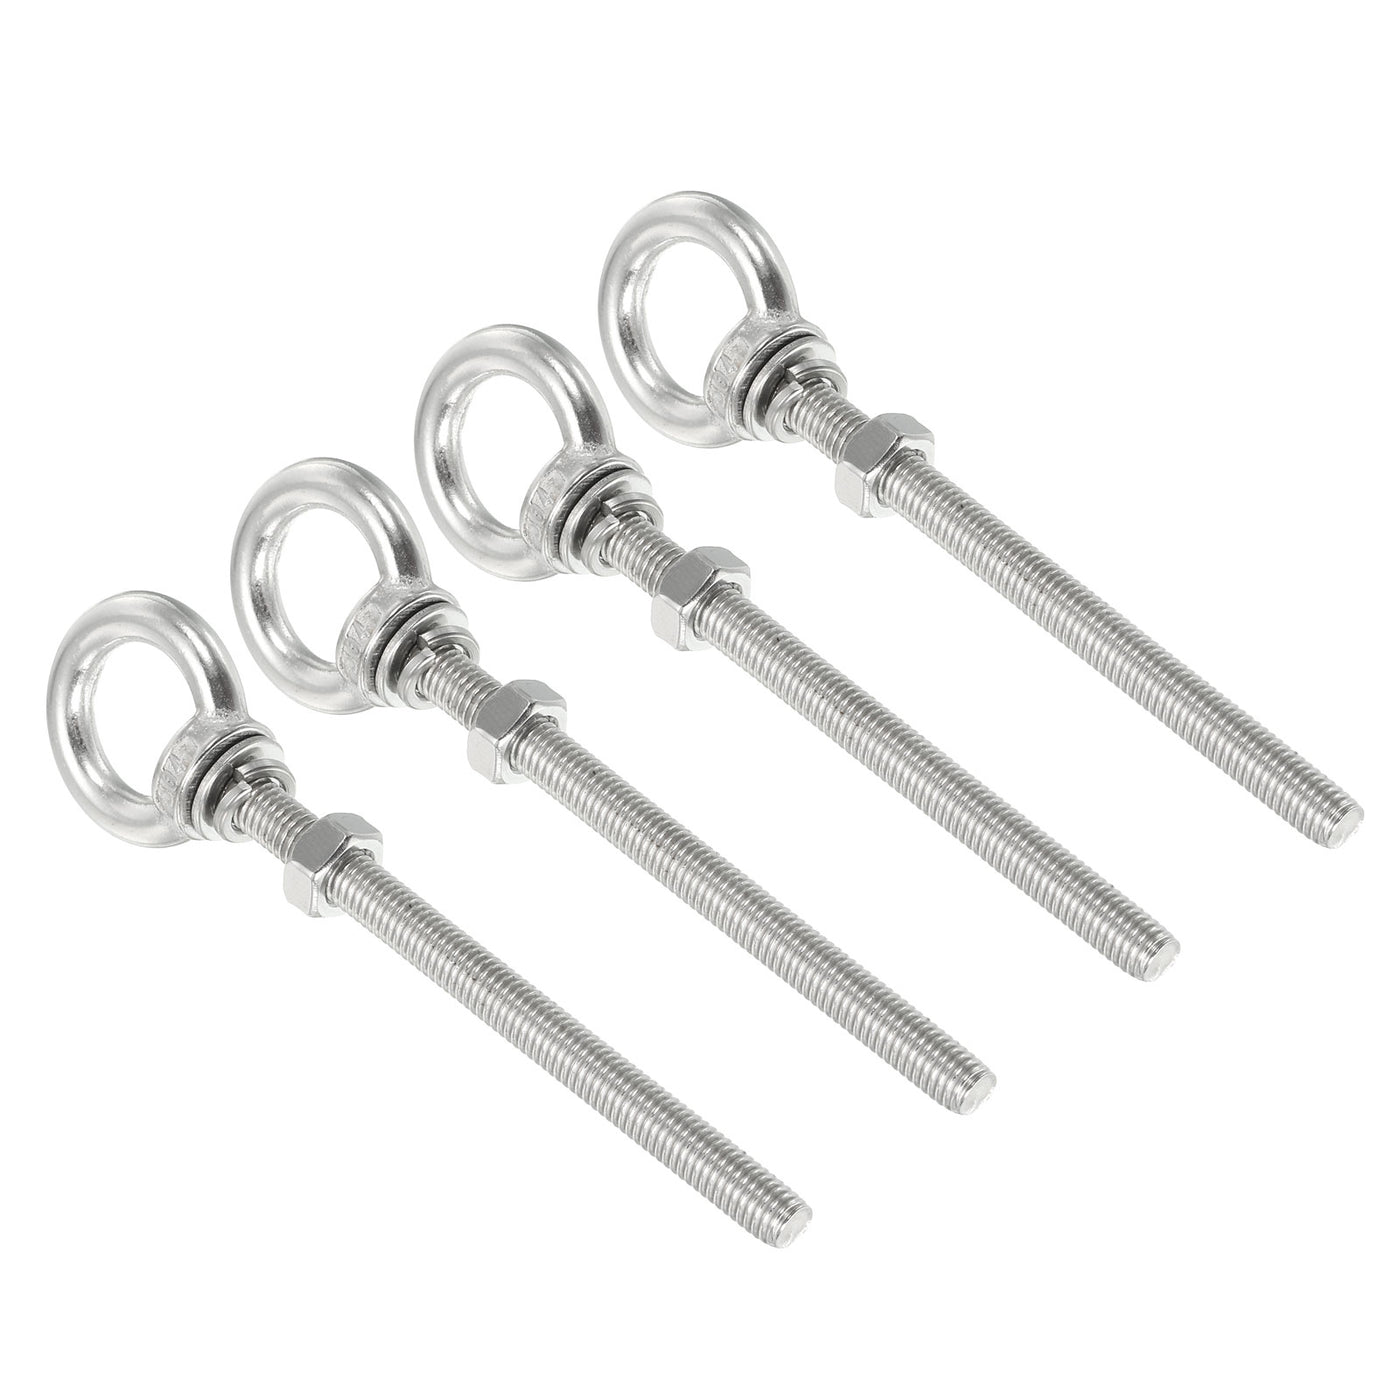 uxcell Uxcell M8x100 5/16"x4" Stainless Steel Eye Bolts Threaded Screw Eyebolt Shoulder Ring with Nuts Washers for Lifting Hanging, 4 Set